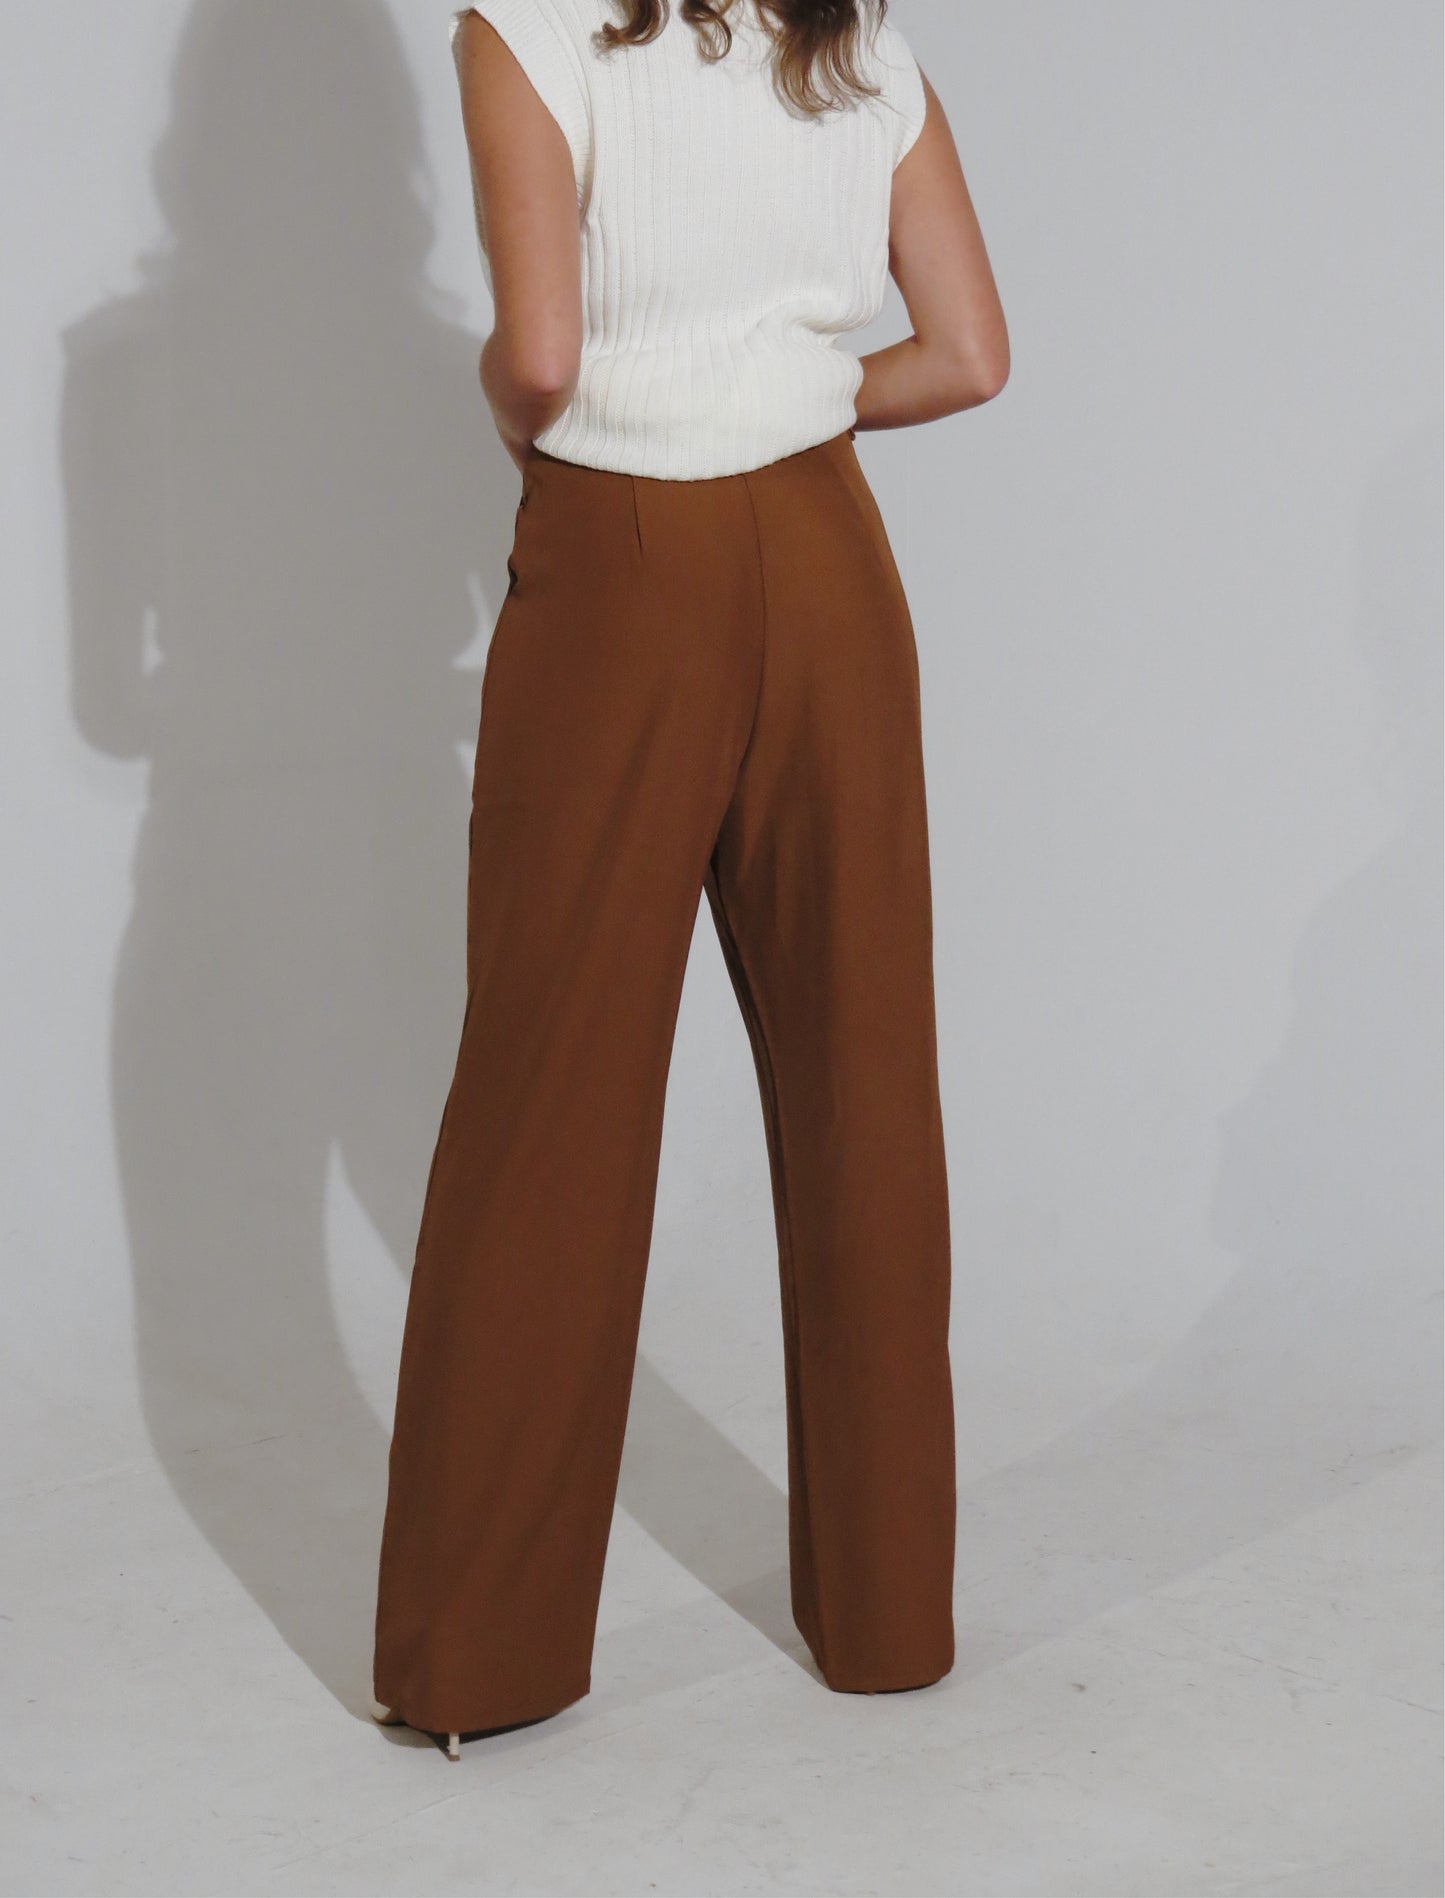 Cinnamon Sugar Trousers – Strictly Casual